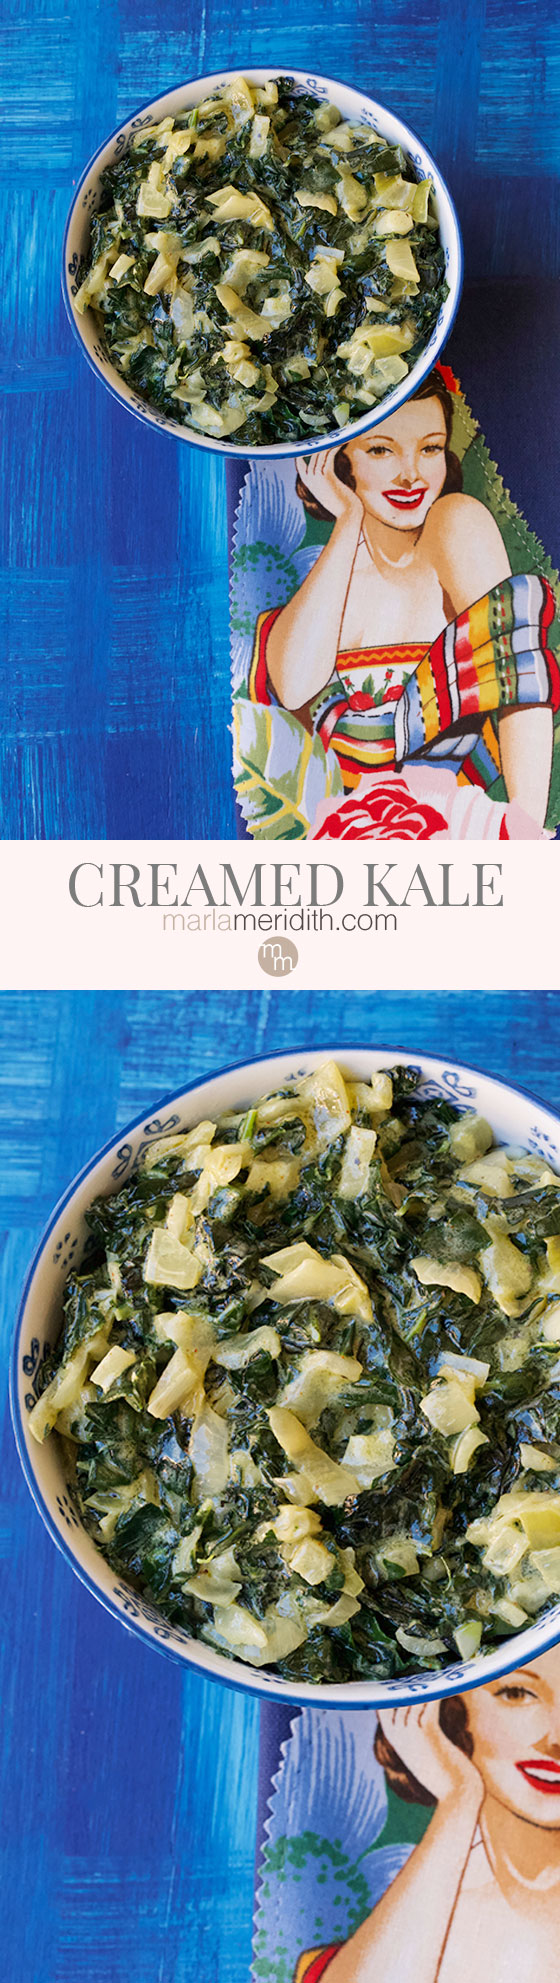 Instead of spinach try this Creamed Kale recipe, the most delicious holiday side dish! You can easily double or triple this recipe to feed a crowd.